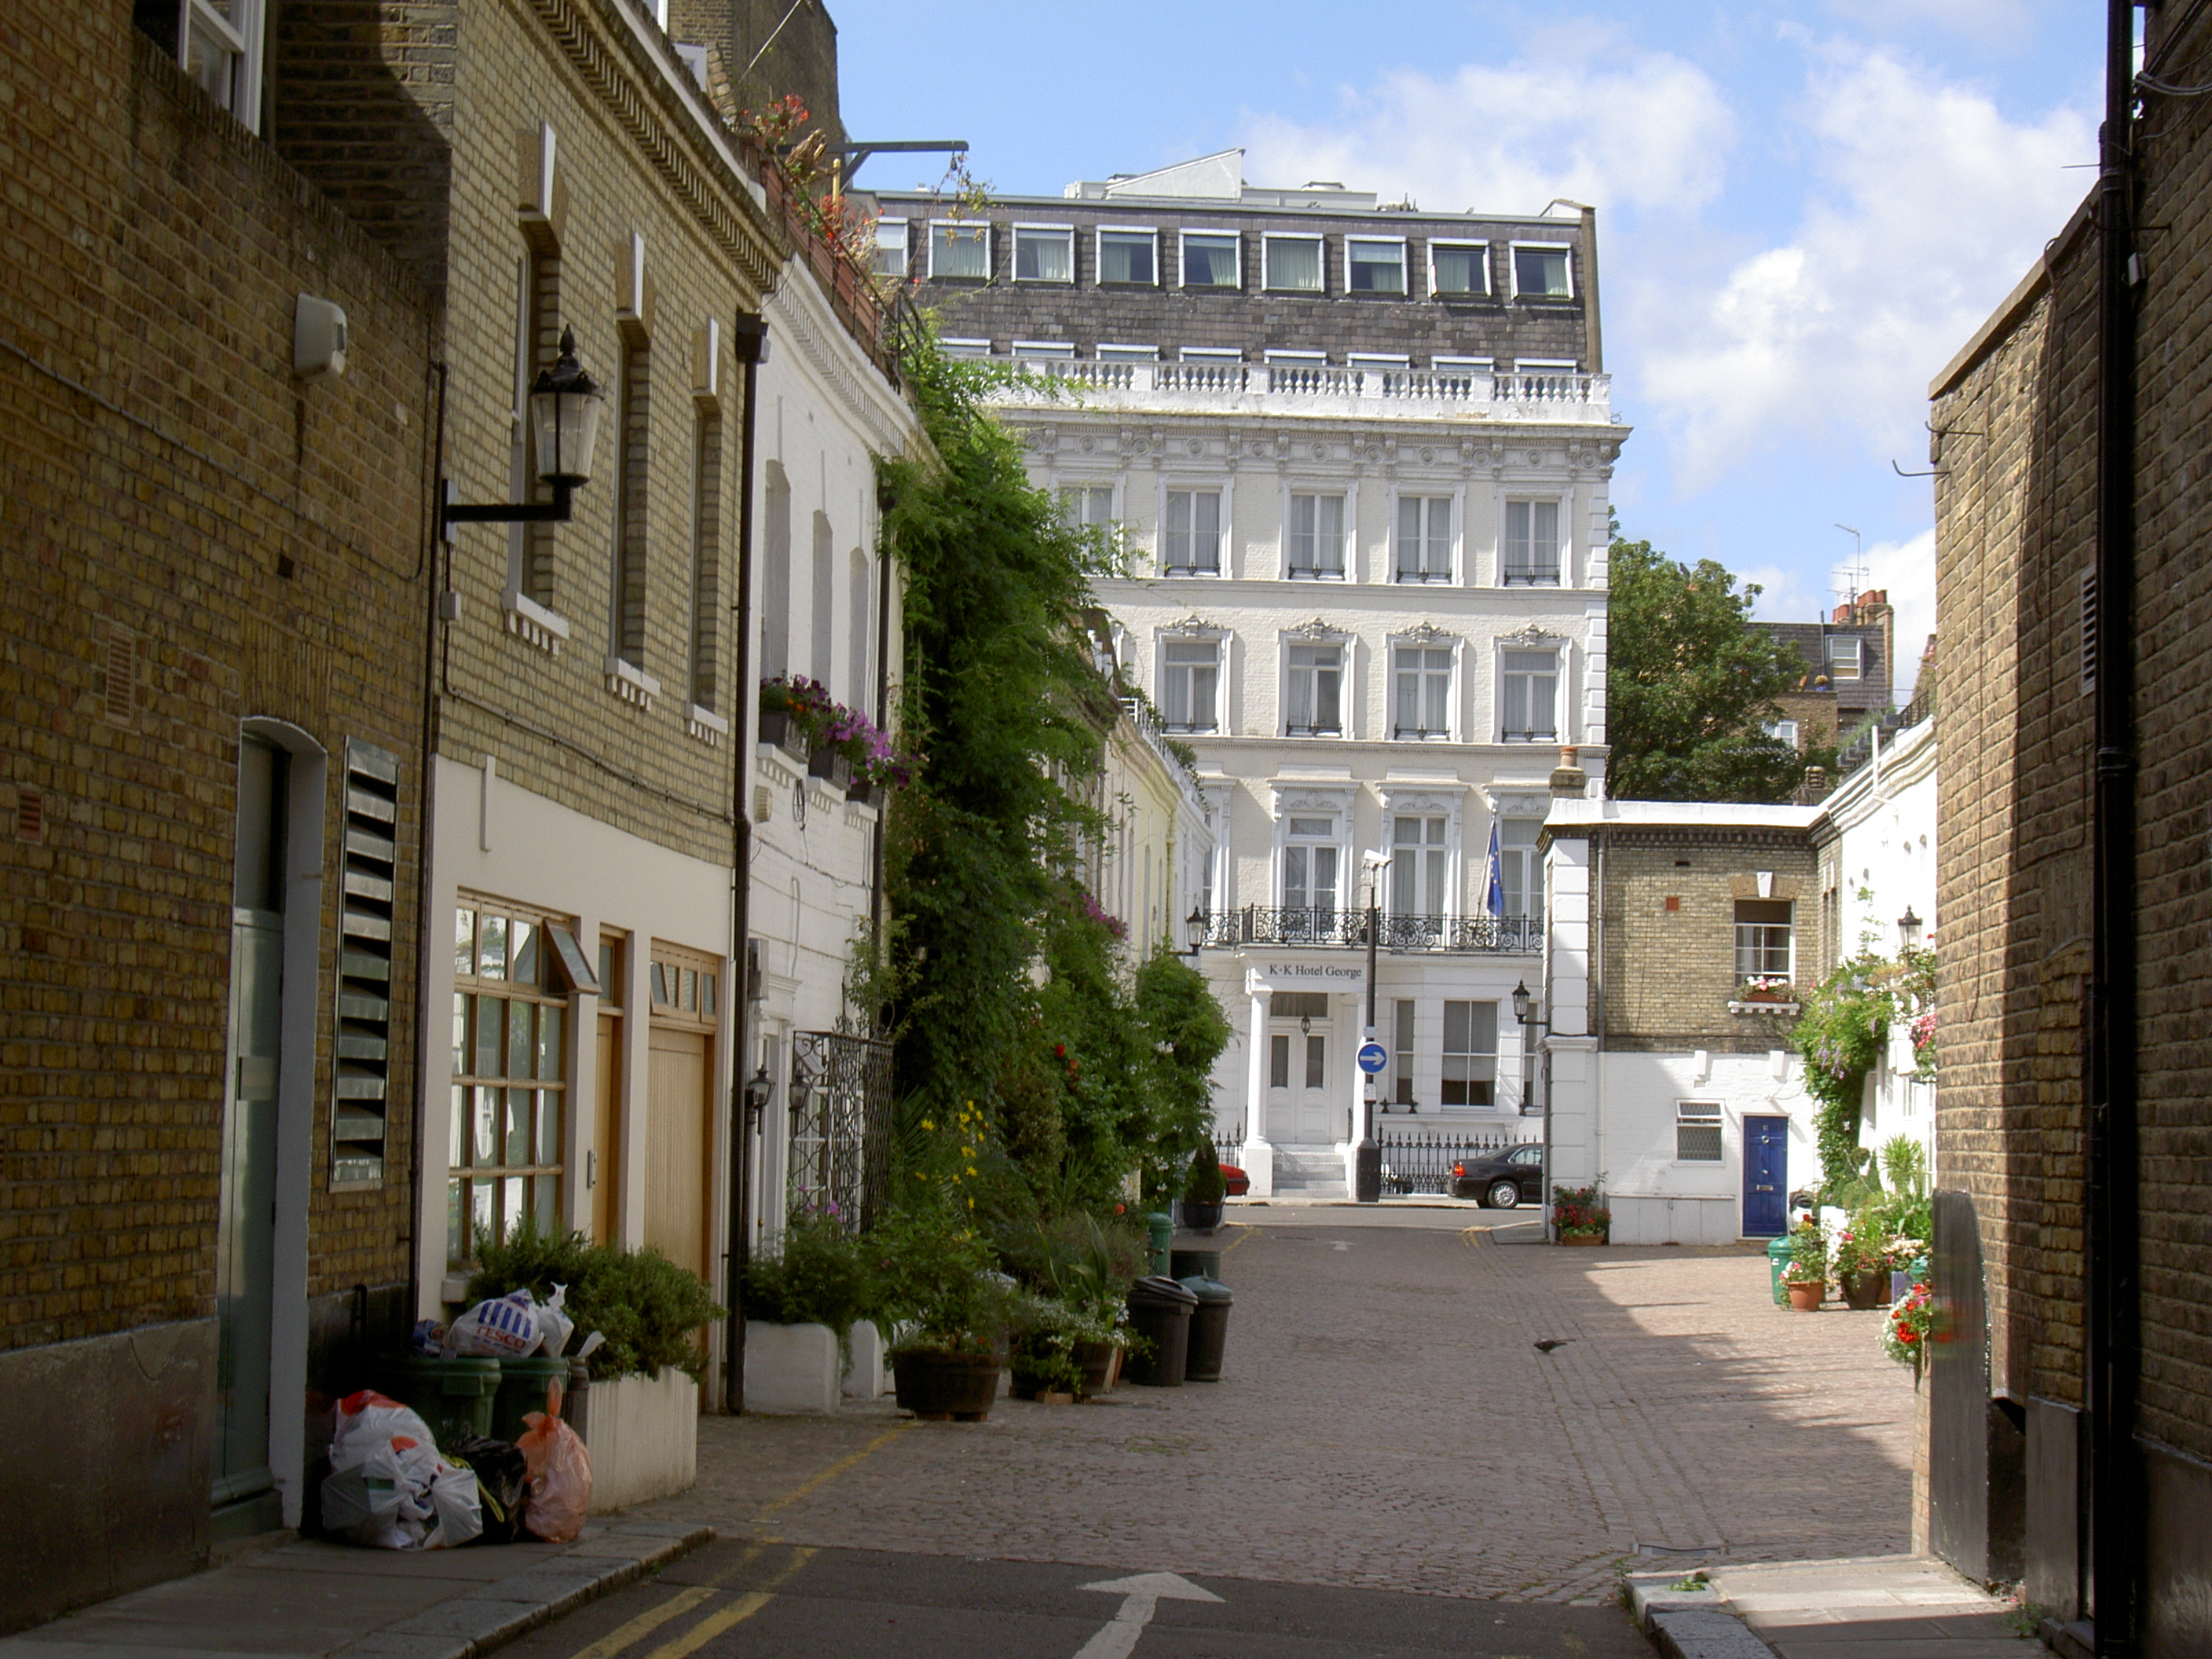 Typical_Street_In_The_Royal_Borough_Of_Kensington_And_Chelsea_In_London